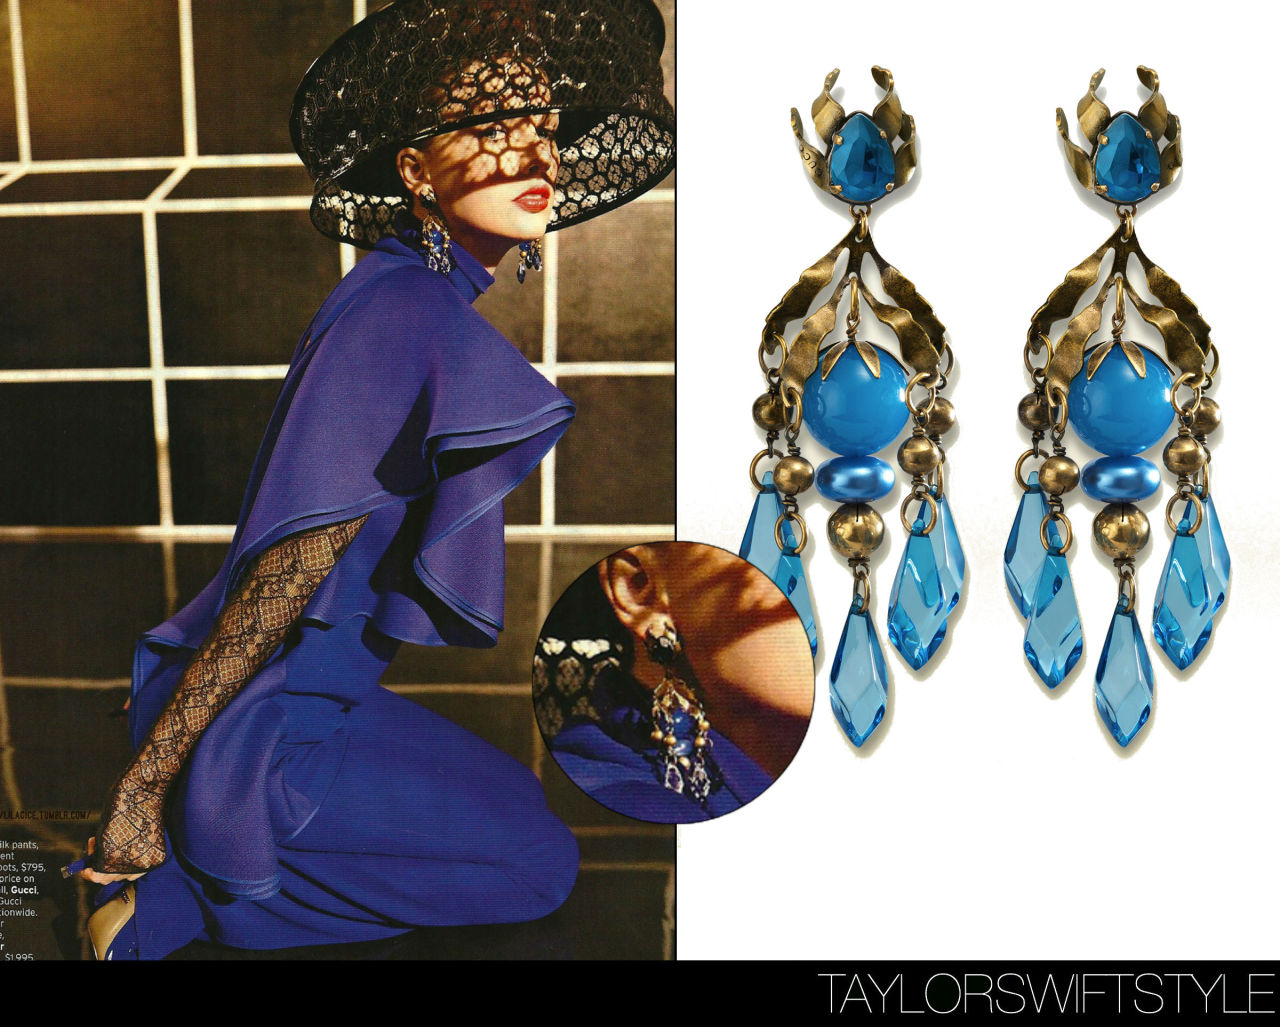 In a photo spread for Elle magazine | March 2013Gucci &#8216;Earrings with Turquoise Pendants&#8217; - $970.00Worn with: Gucci top/pants, Gucci booties and Alexander McQueen headpiece